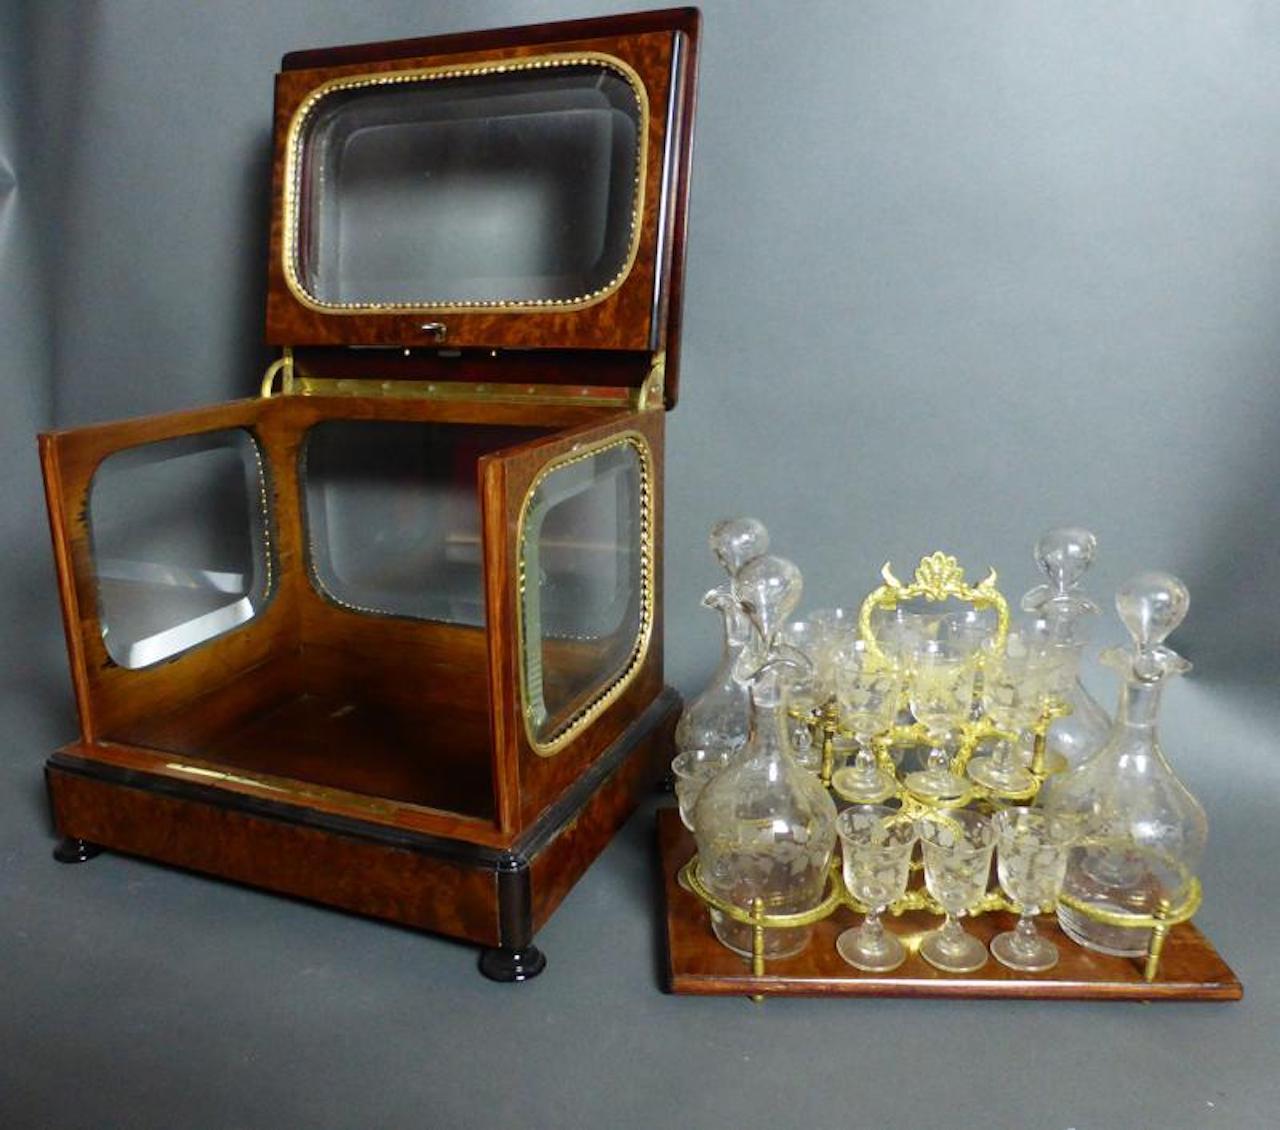 19th Century Napoleon III Wood Marquetry and Beveled Glasses Liquor Cellar For Sale 3